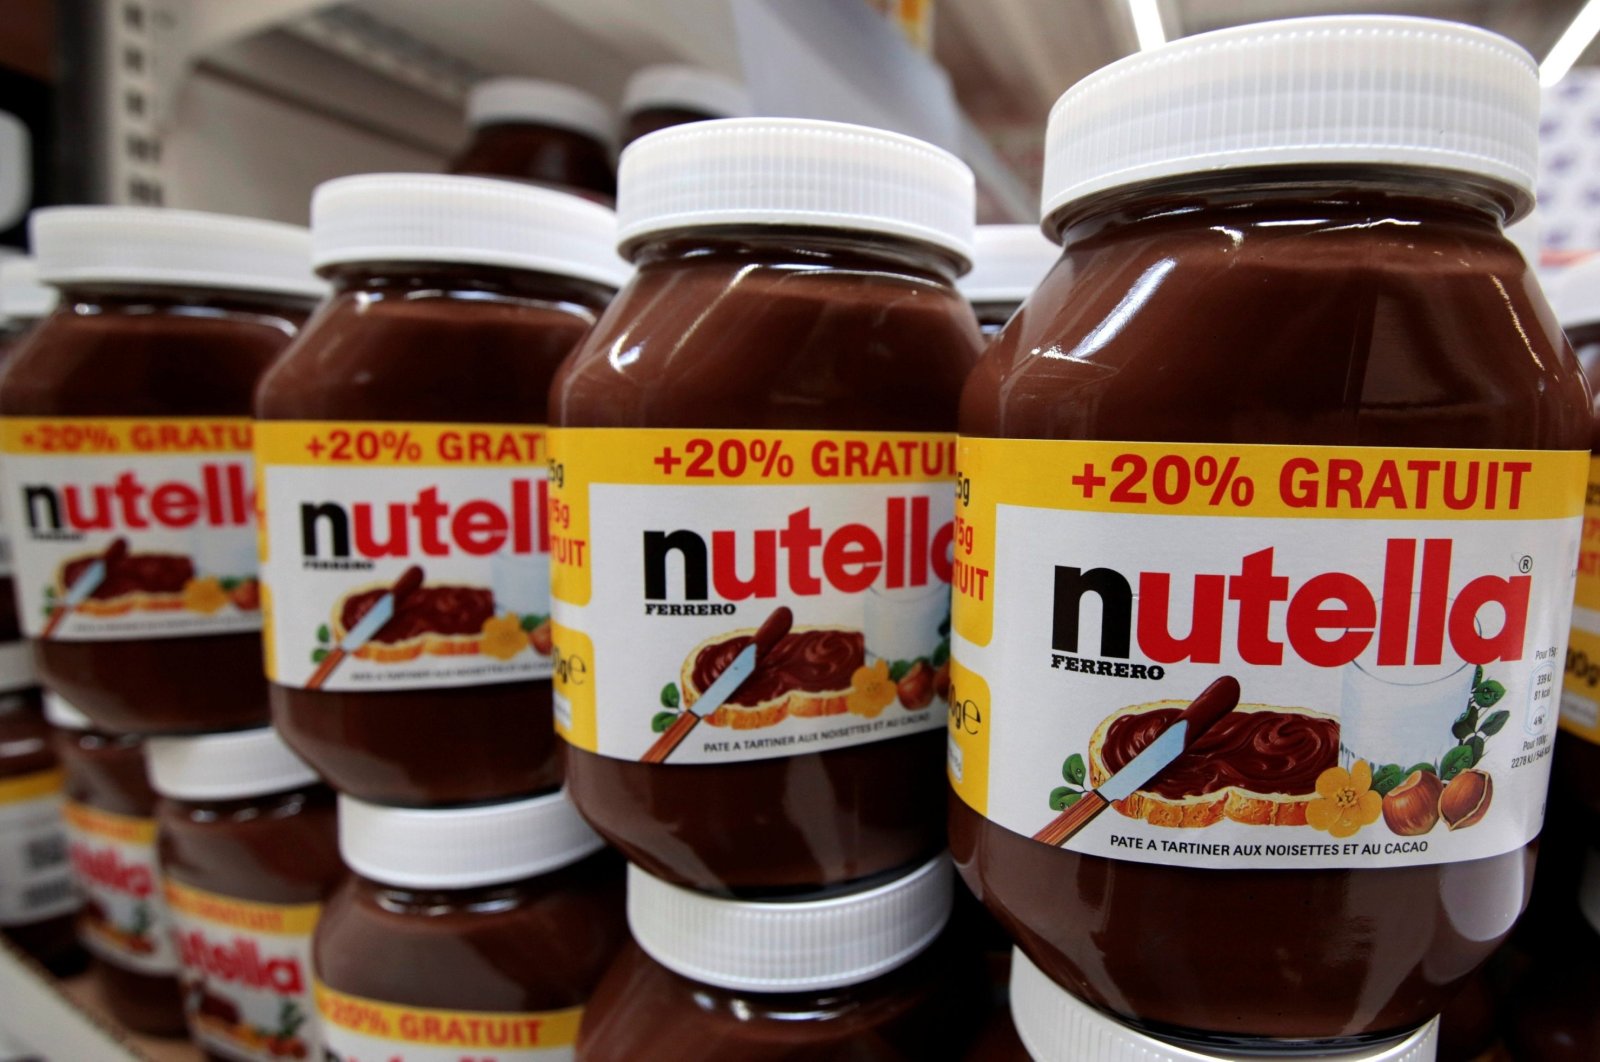 Jars of Nutella chocolate-hazelnut paste are displayed at a market in Nice, France, April 6, 2016. (Reuters Photo)